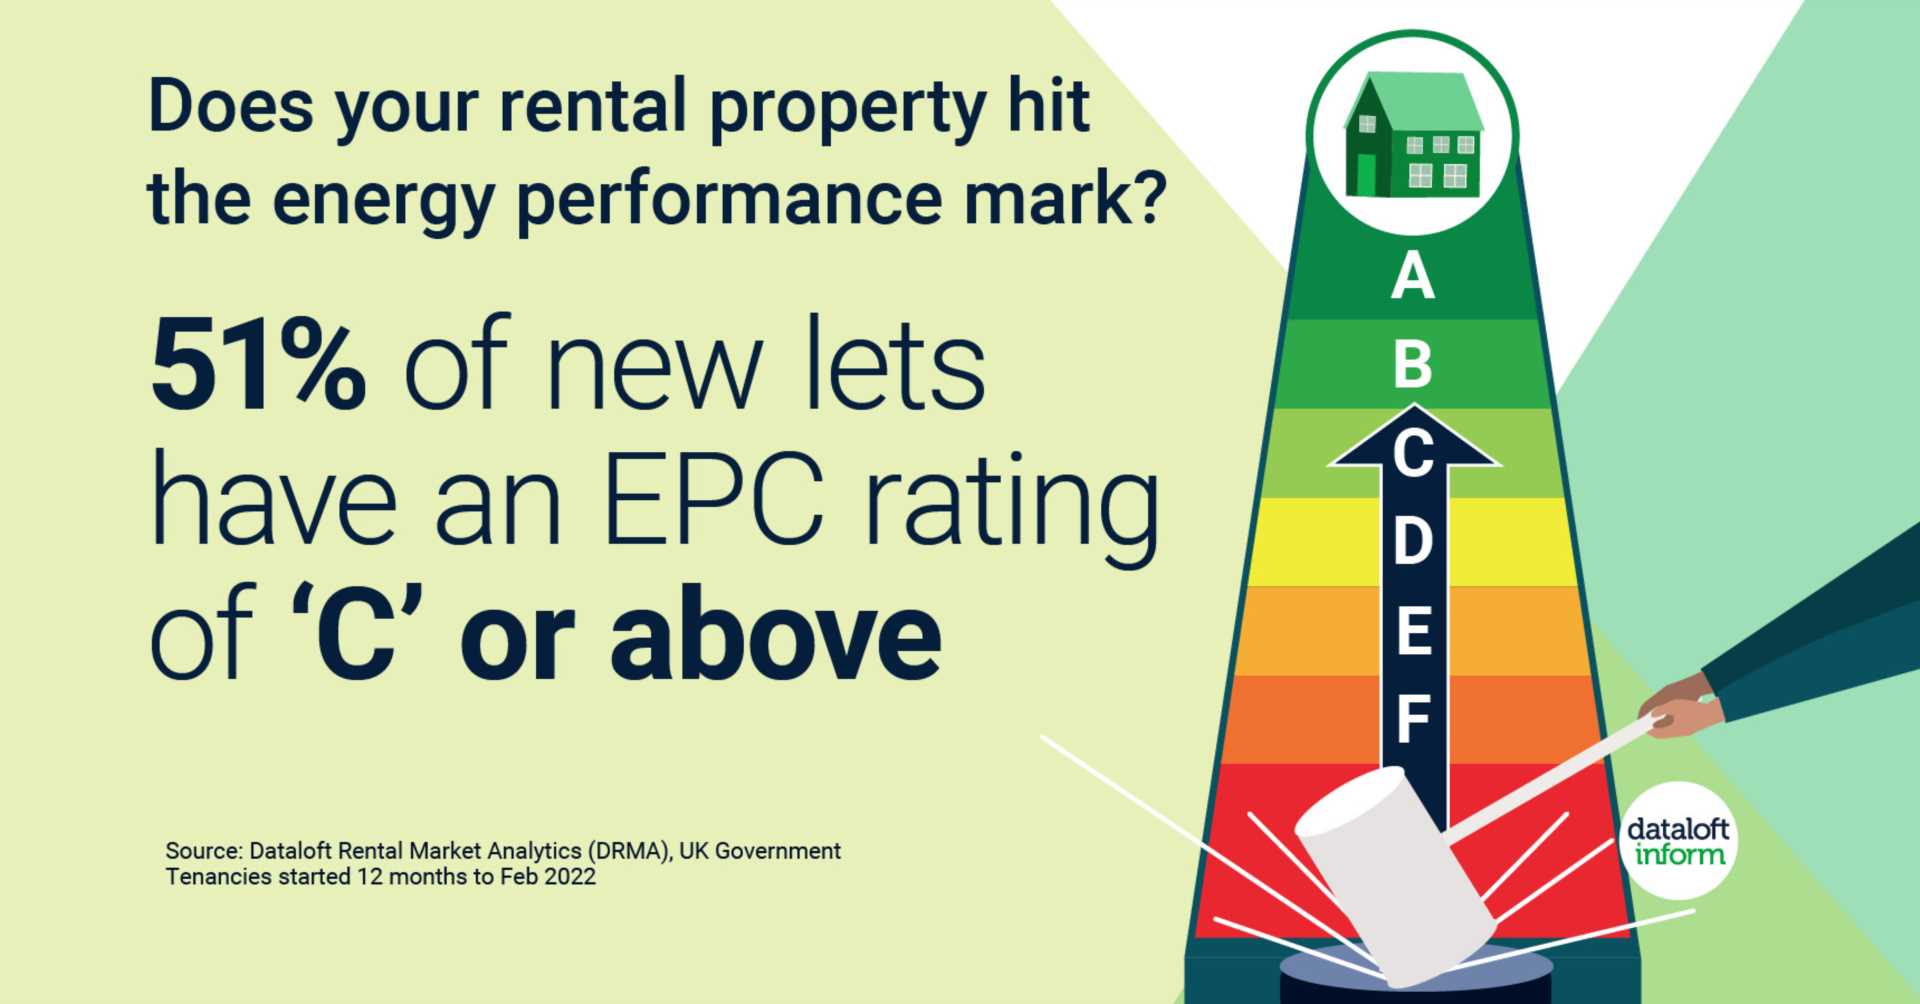 Does your rental property hit the energy performance mark?